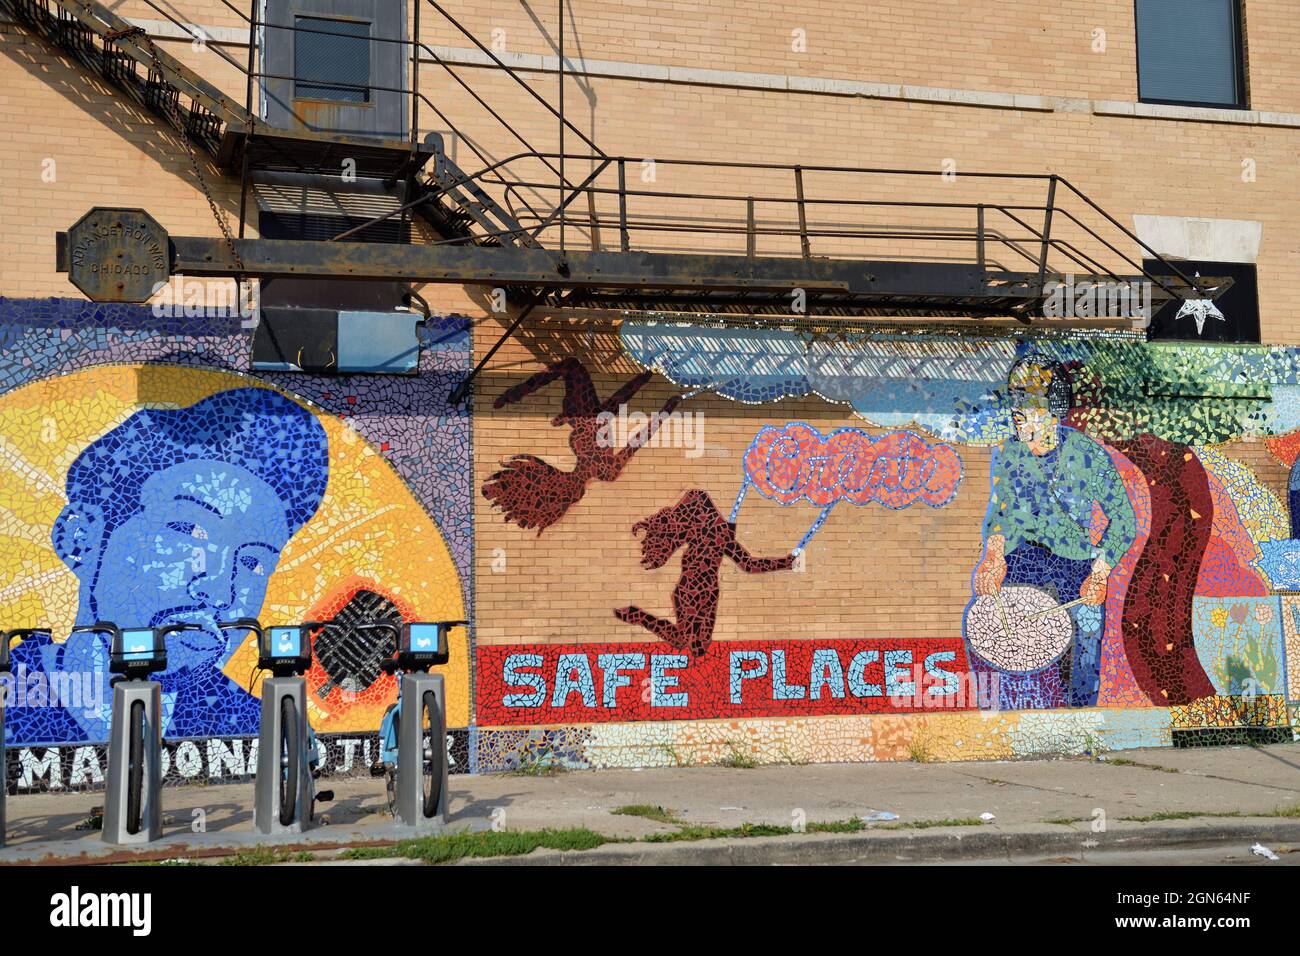 Chicago, Illinois, USA. A colorful mural applied to the side of a building in the Pilsen neighborhood on the city's South Side. Stock Photo